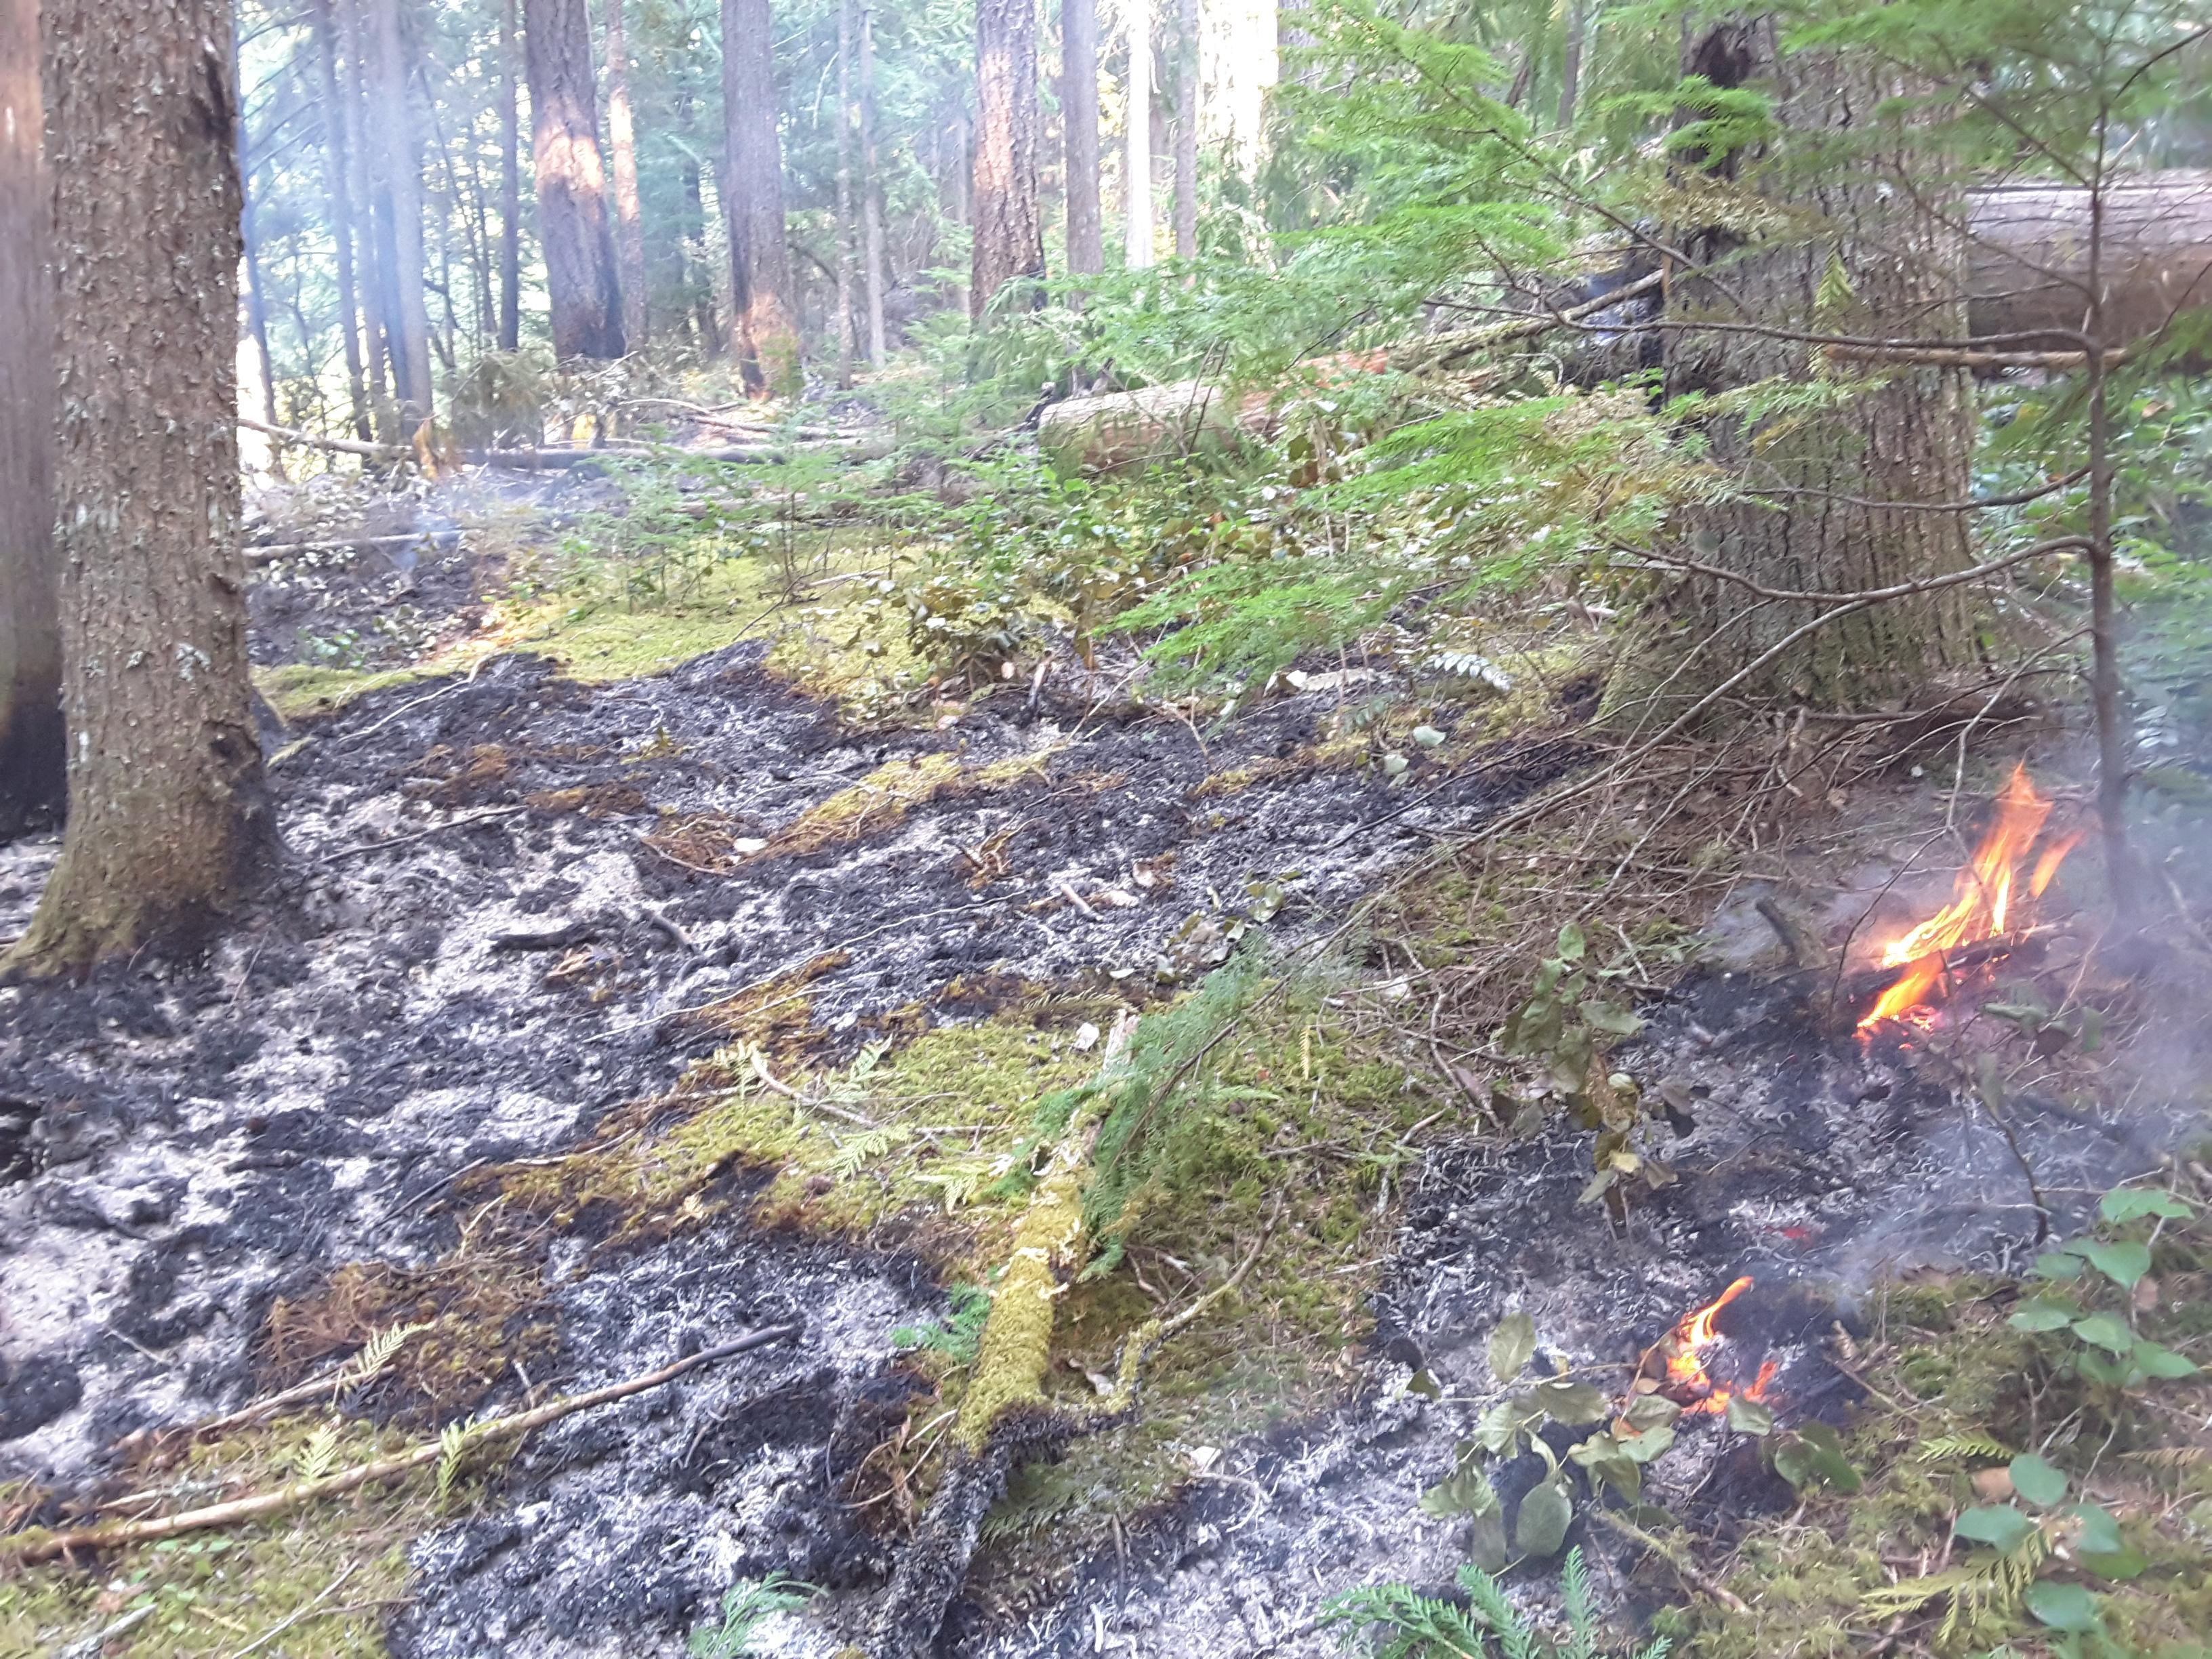 A forested area with patches of the duff layer on the ground burned, part still unburned. A few small flames are visible from burning sticks on the ground.